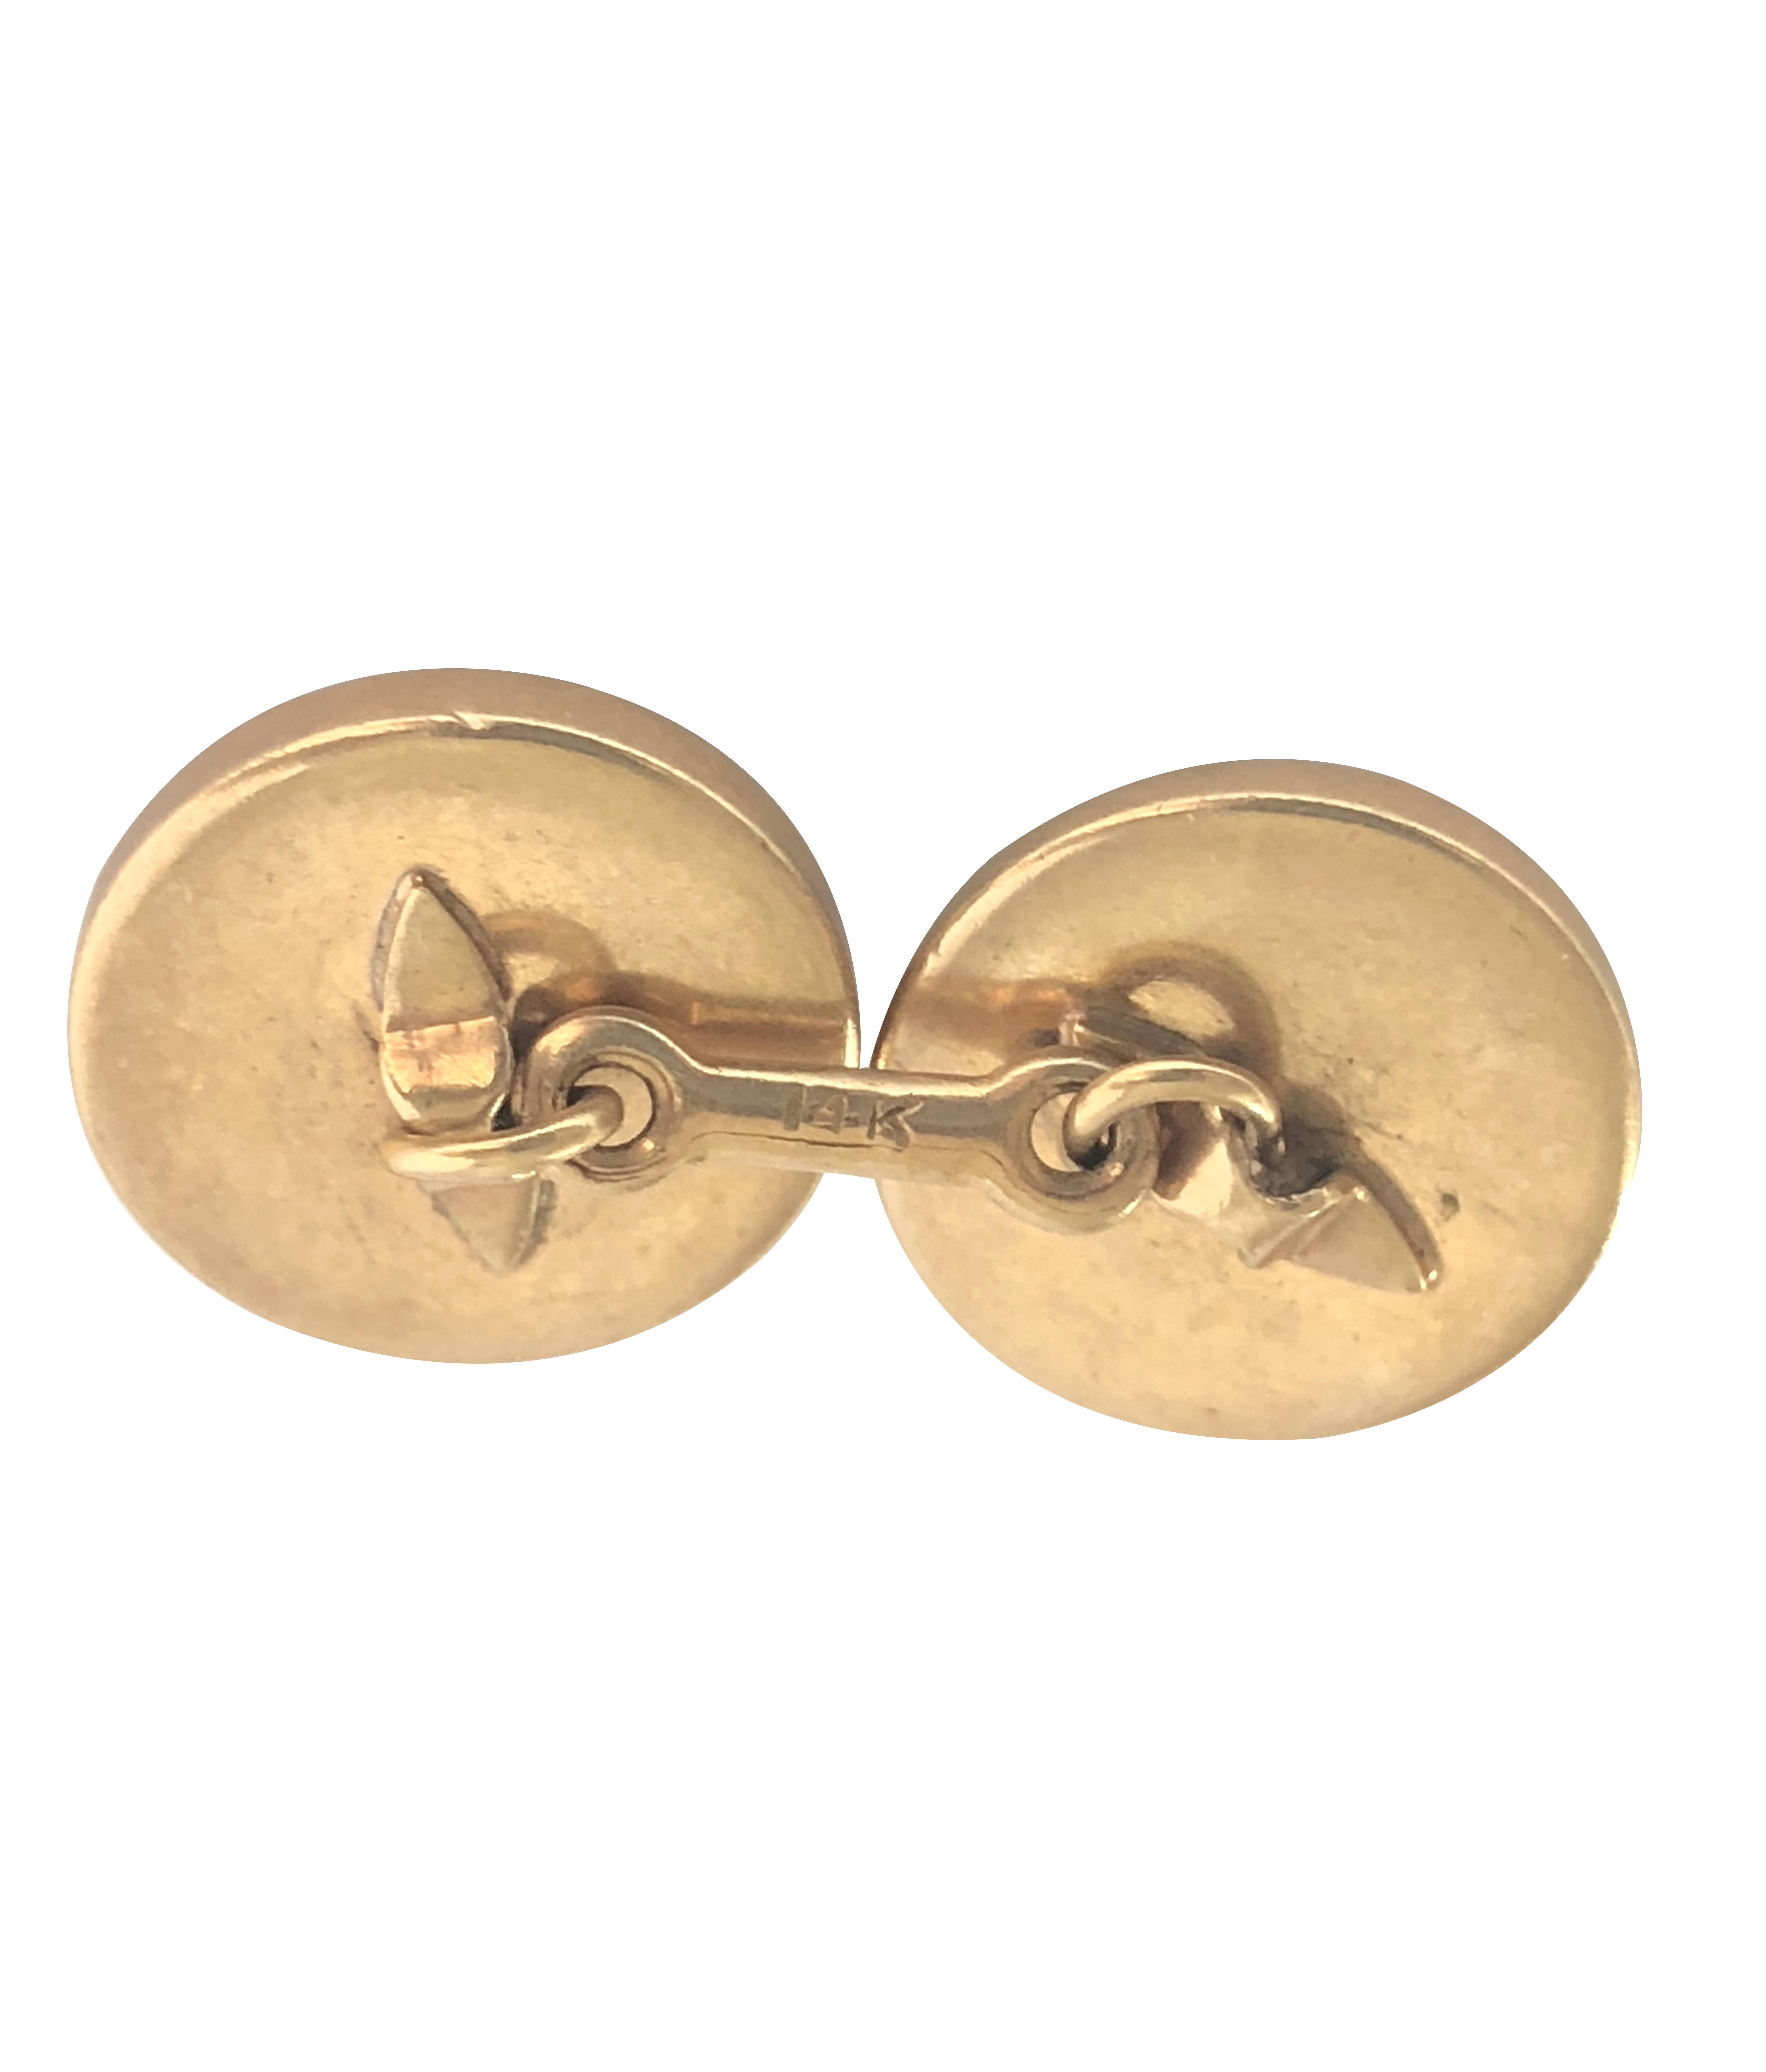 Circa 1920s 14K Yellow Gold Cufflinks with deep carved intaglio crystals depicting Sail Boats, backed with Mother of Pearl, the tops measure 1/2 inch in diameter. 